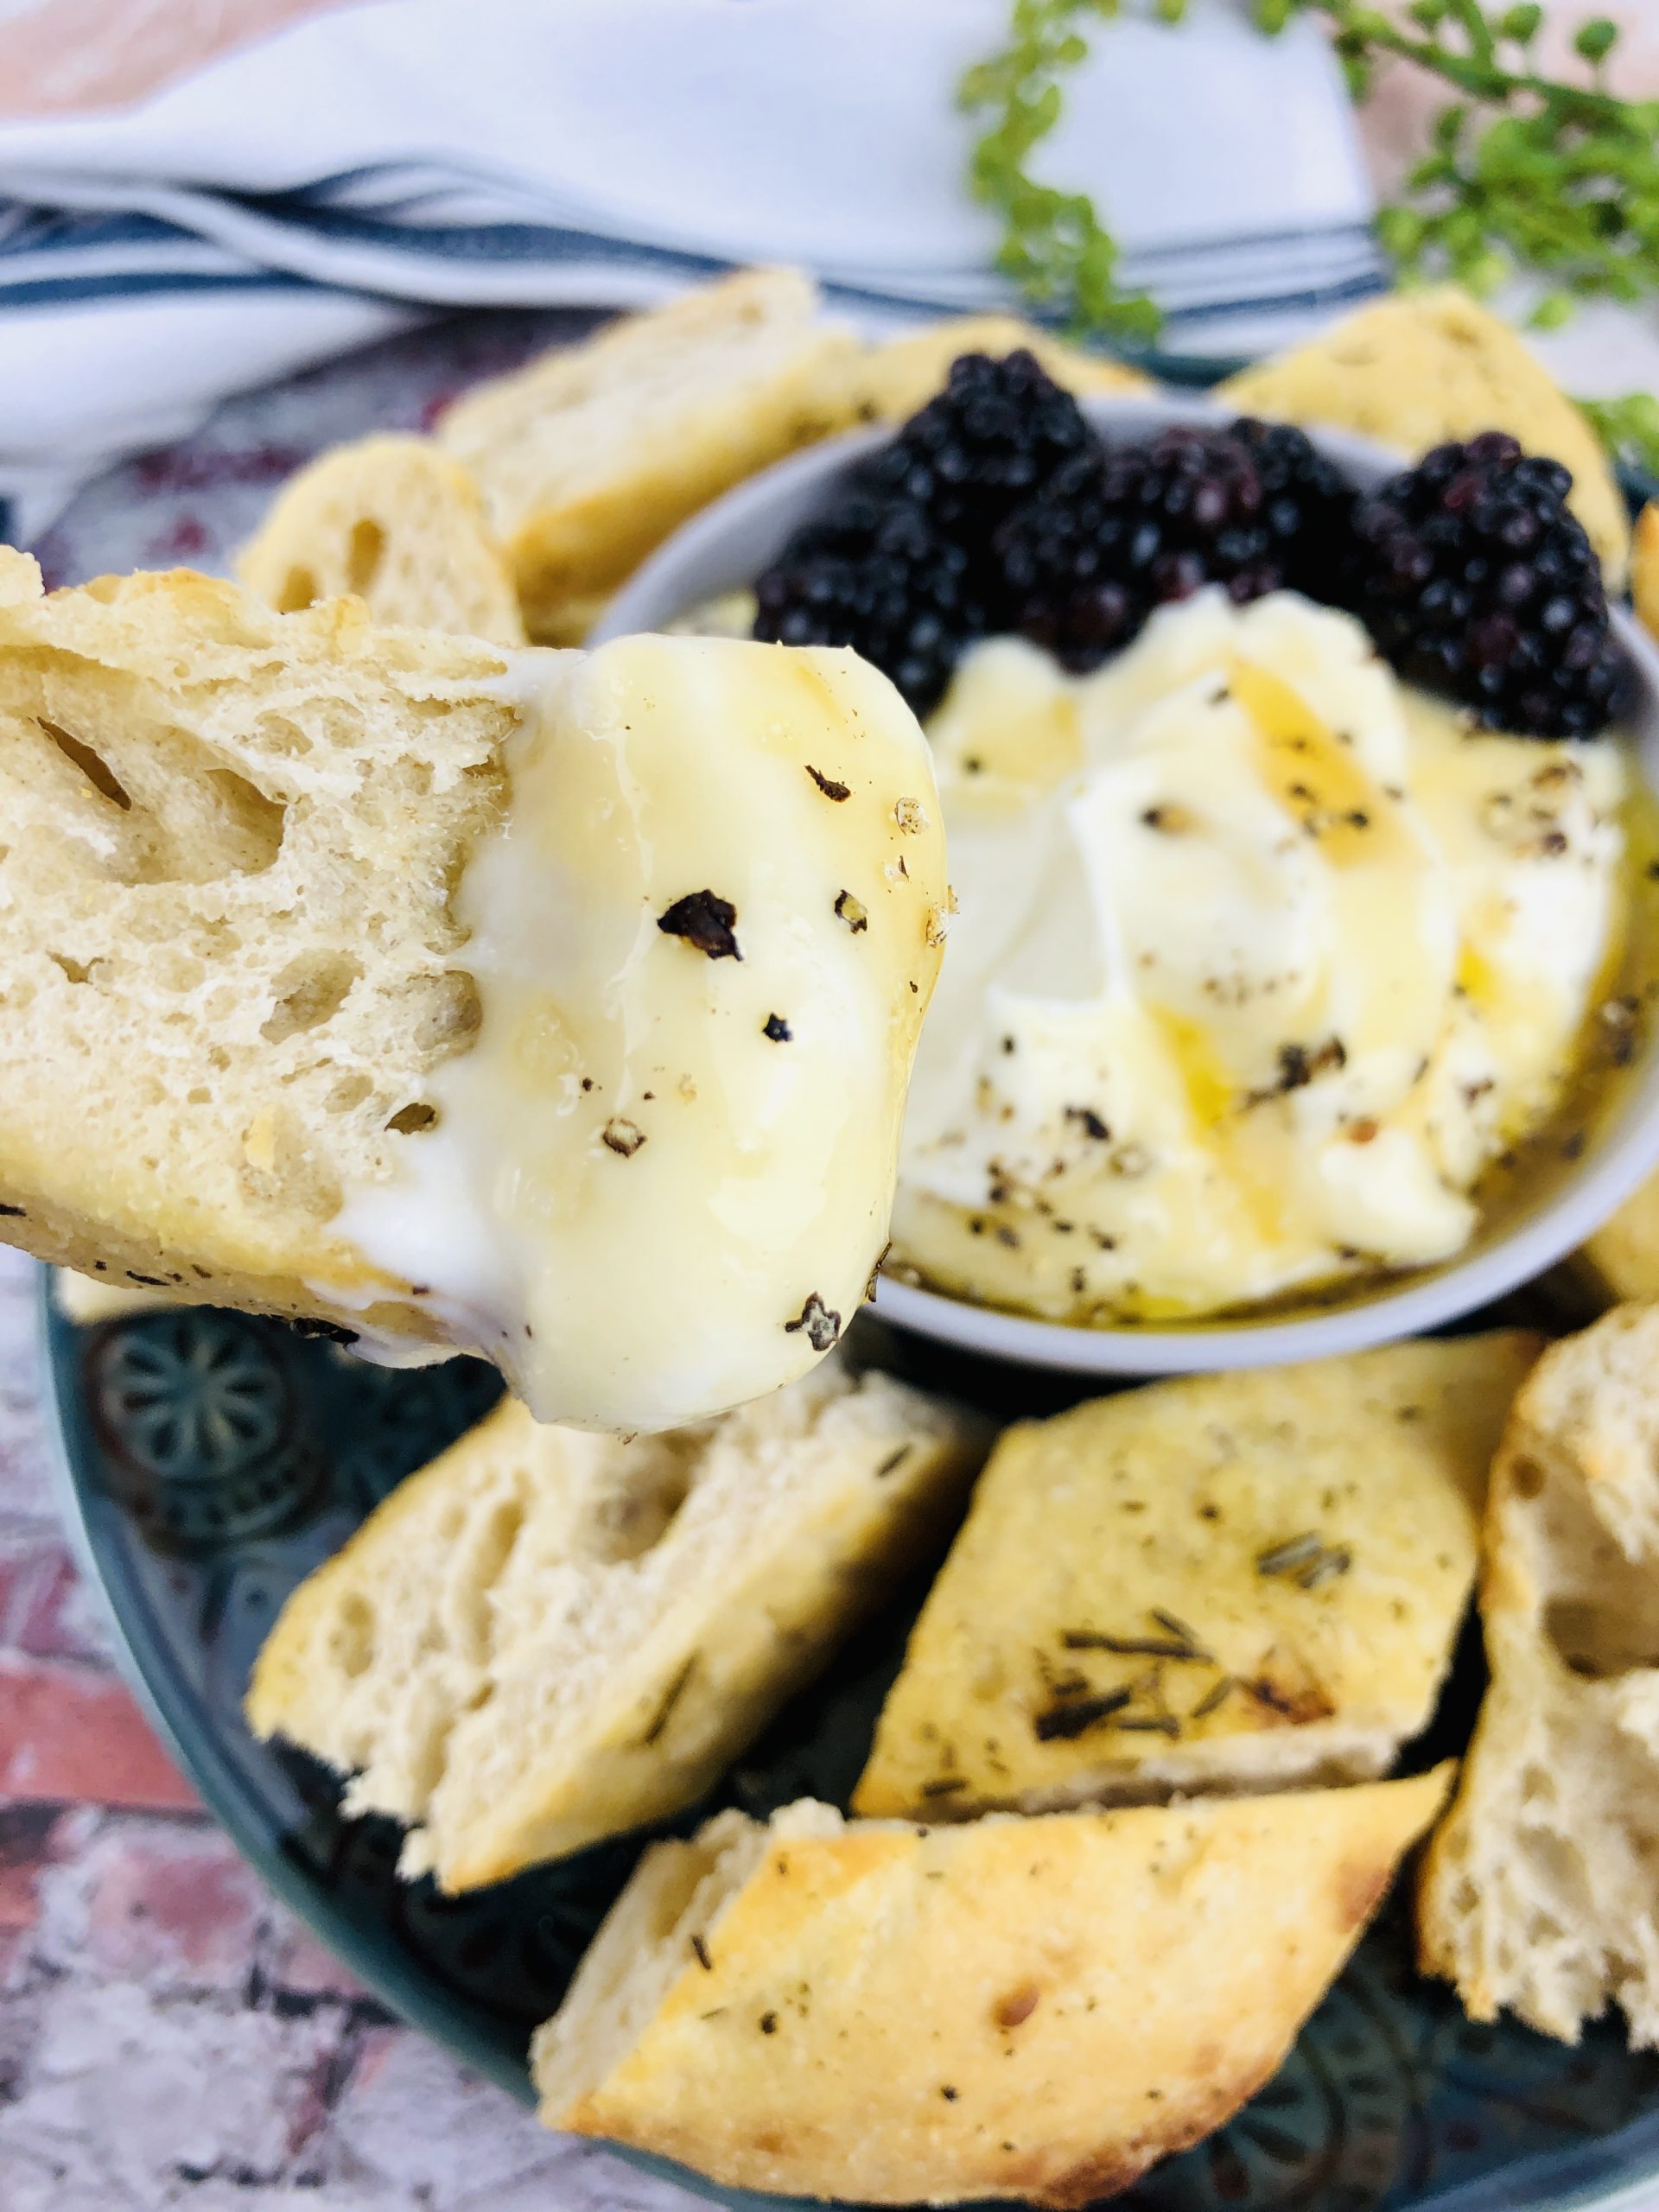 Whipped Ricotta Dip with Honey with a side of black berries and crusty bread.